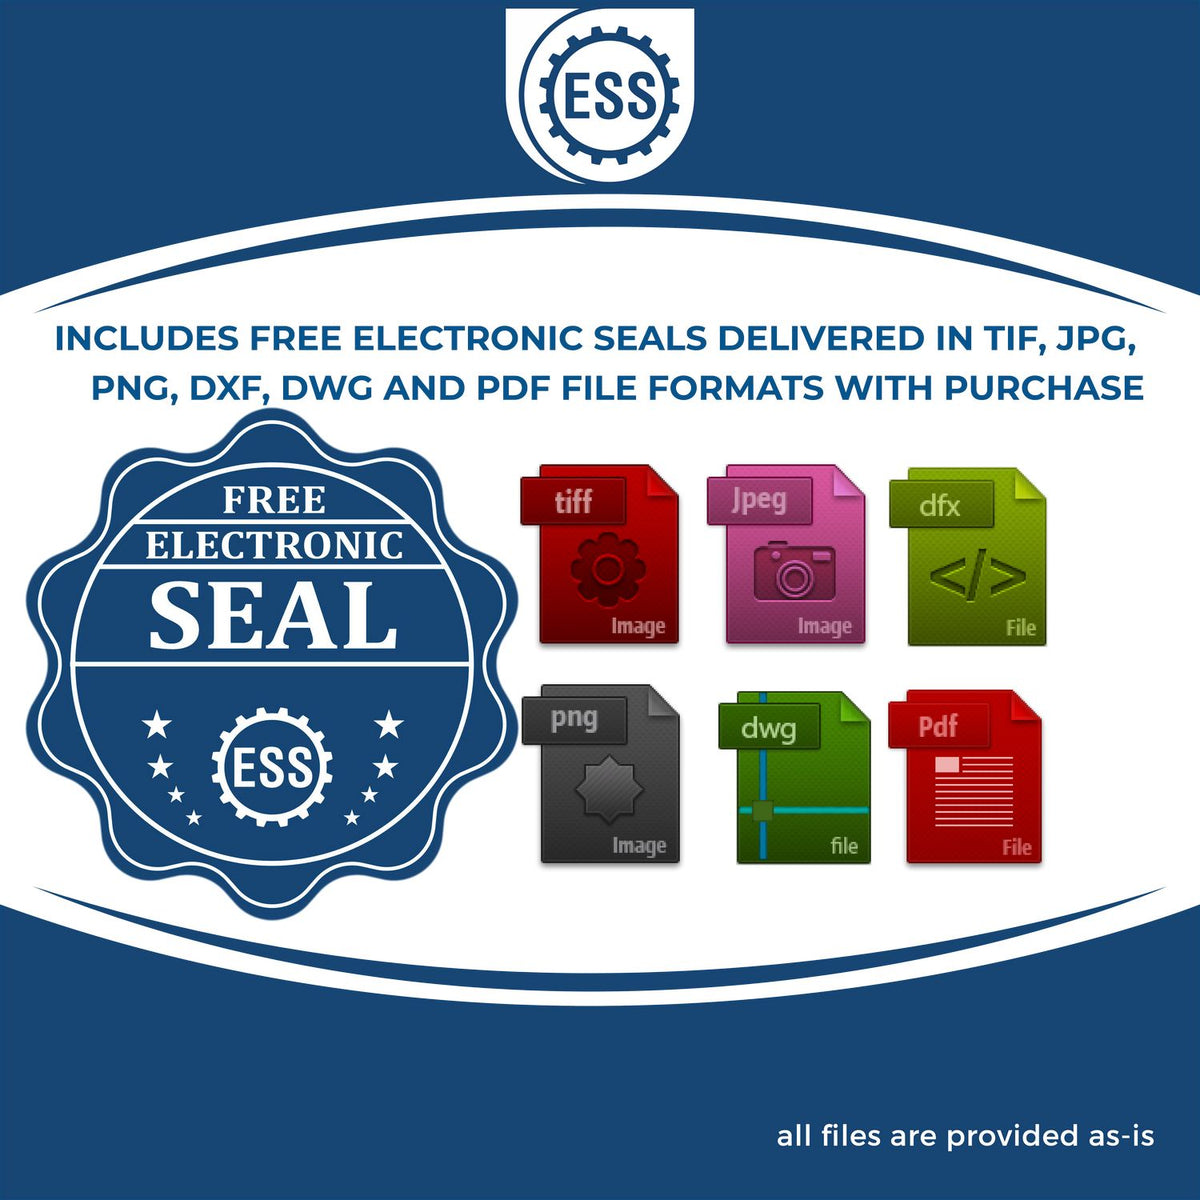 An infographic for the free electronic seal for the PSI Puerto Rico Notary Stamp illustrating the different file type icons such as DXF, DWG, TIF, JPG and PNG.